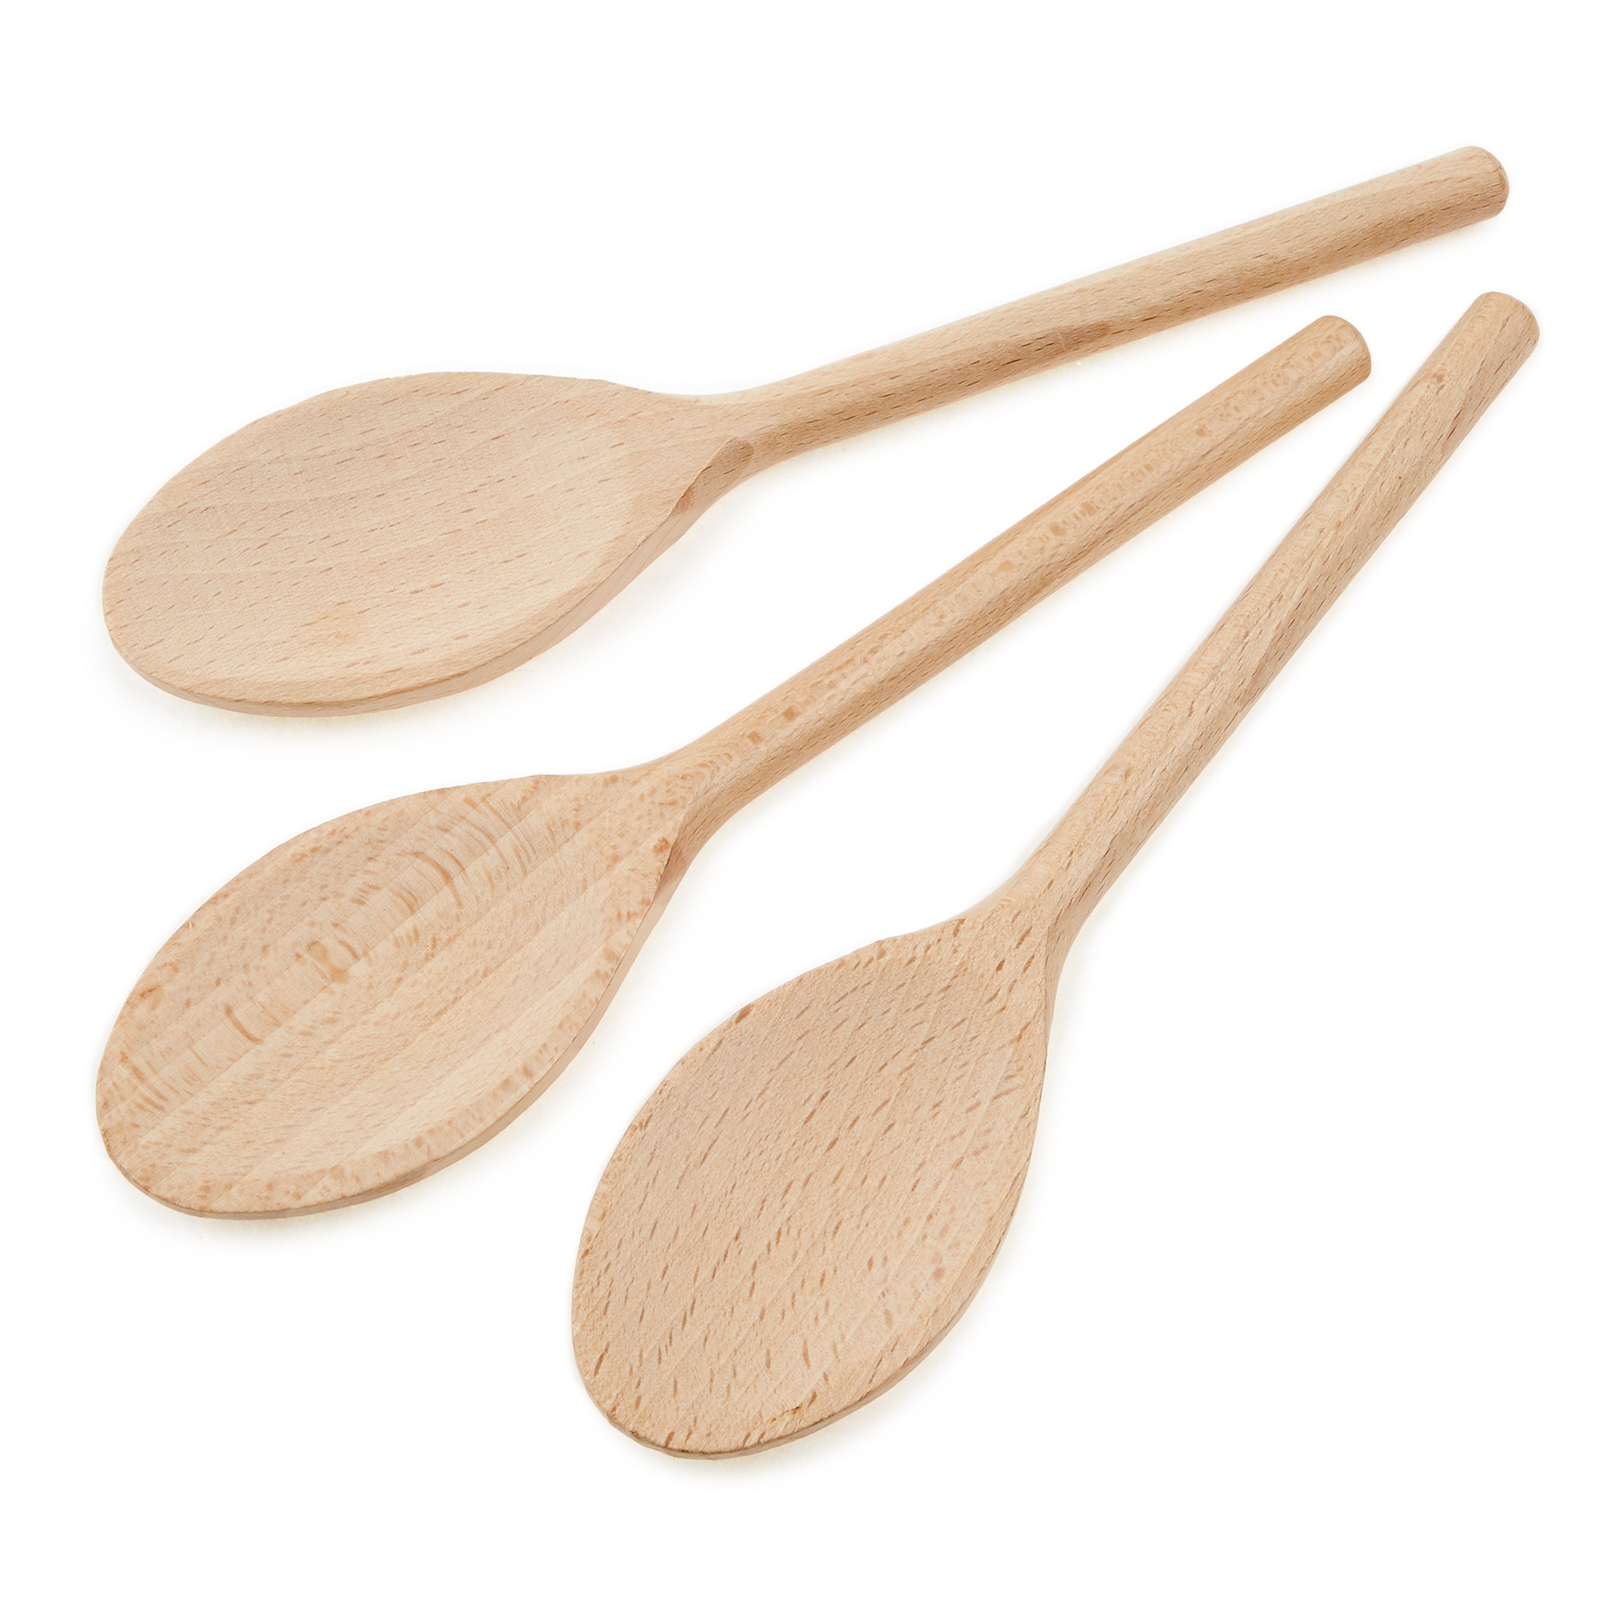 Wooden Spoons - 200mm - Pack of 3